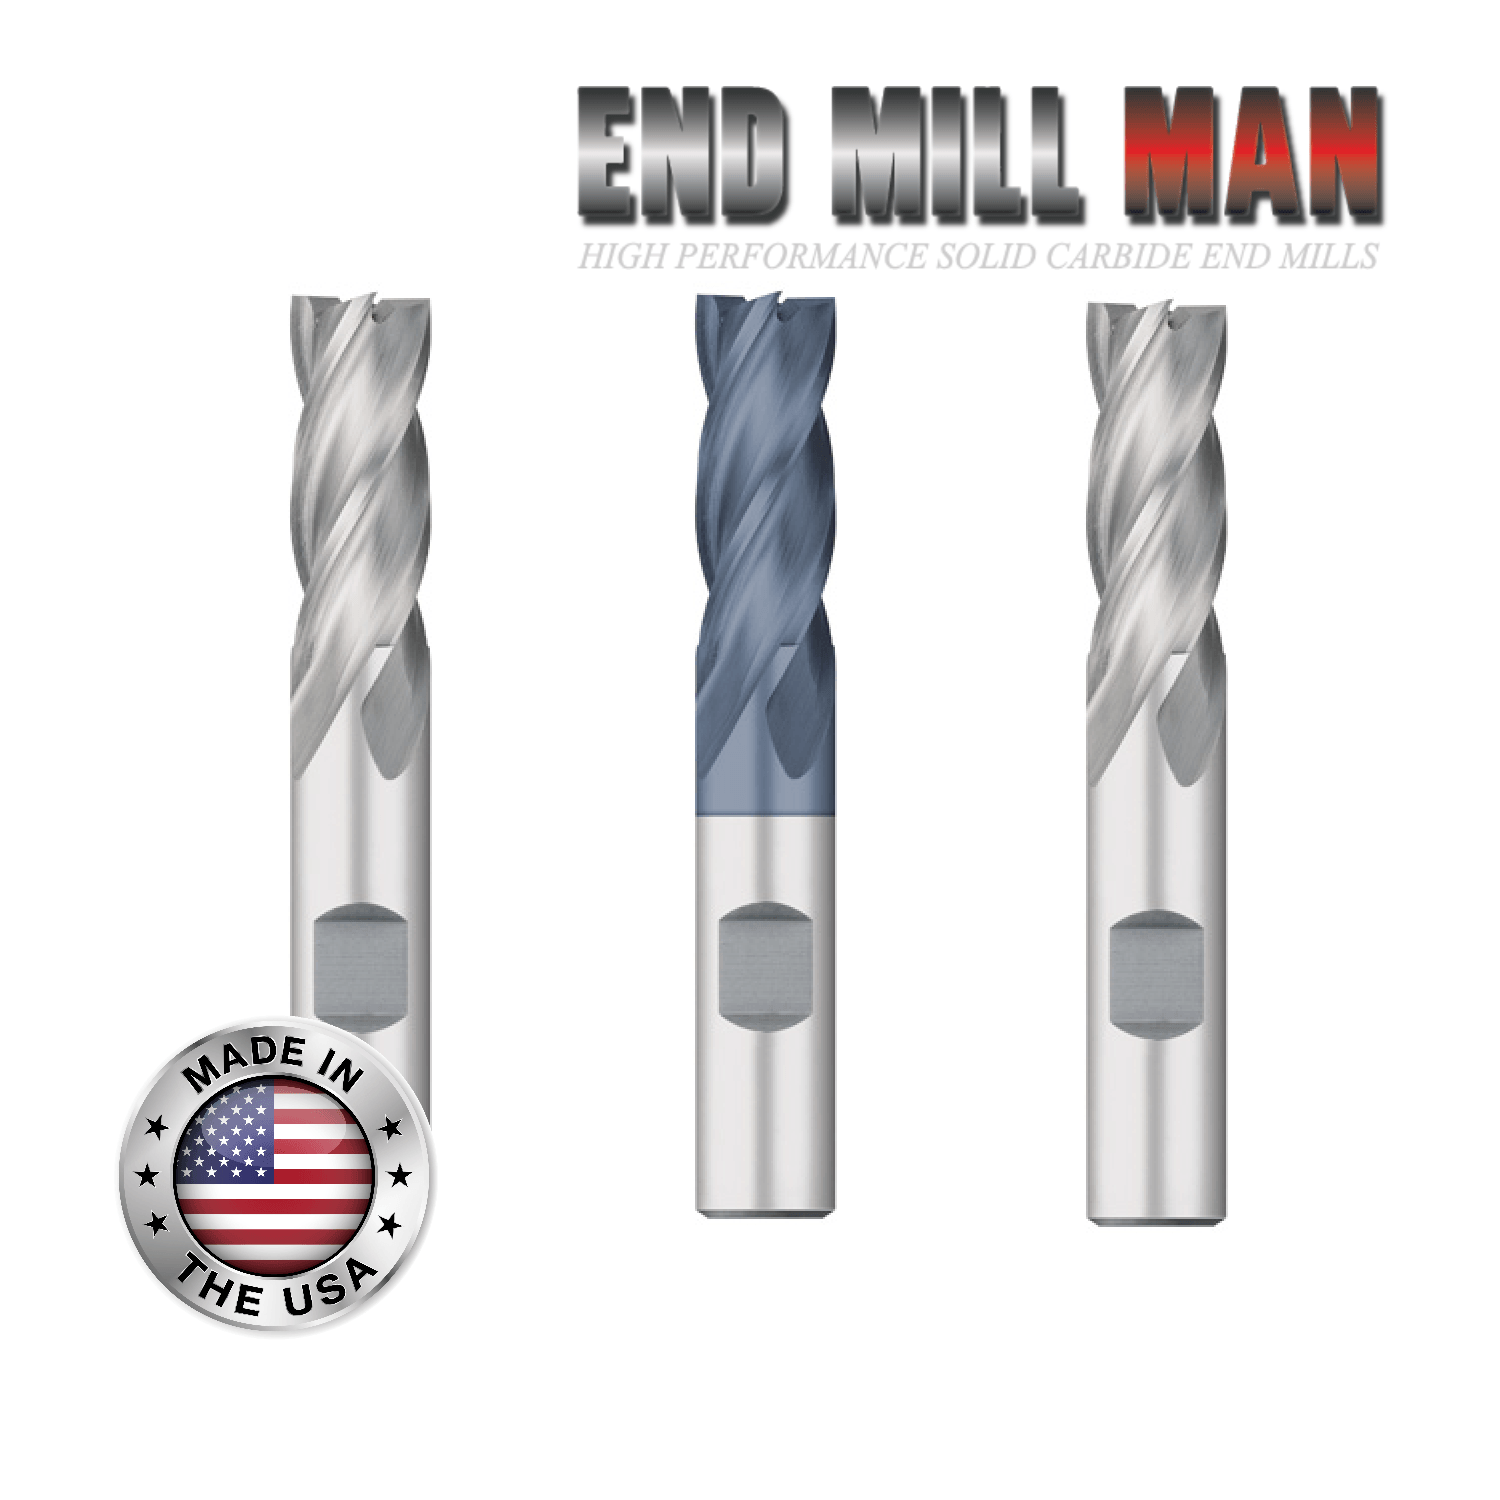 1/4" x 5/8" LOC (3 Pack) HSS 4 Flute End Mills (3/8" Shanks) - The End Mill Store 